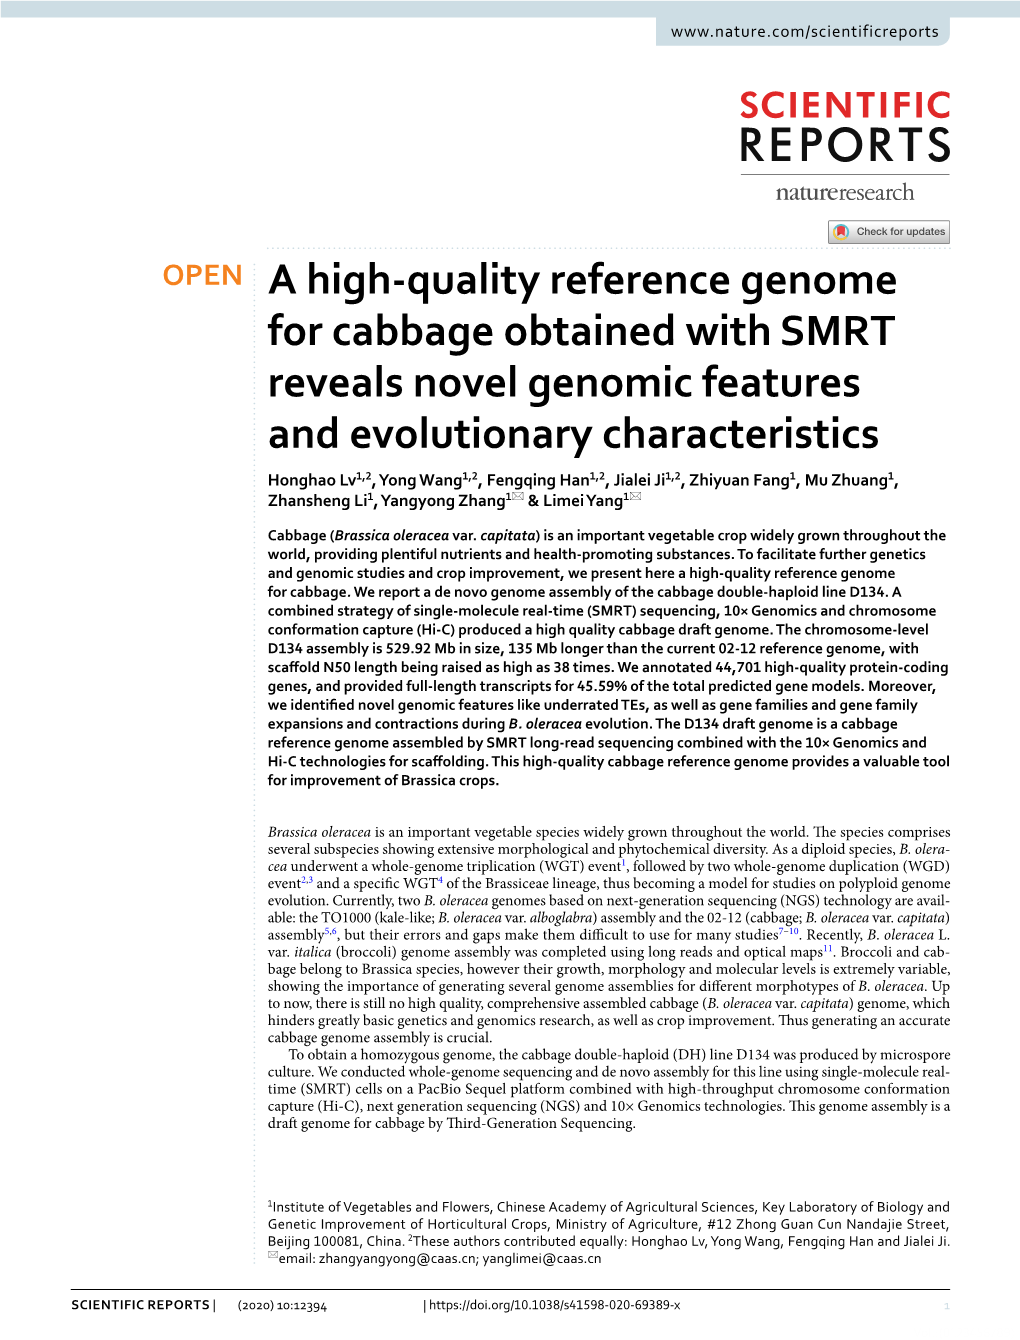 A High-Quality Reference Genome for Cabbage Obtained with SMRT Reveals Novel Genomic Features and Evolutionary Characteristics